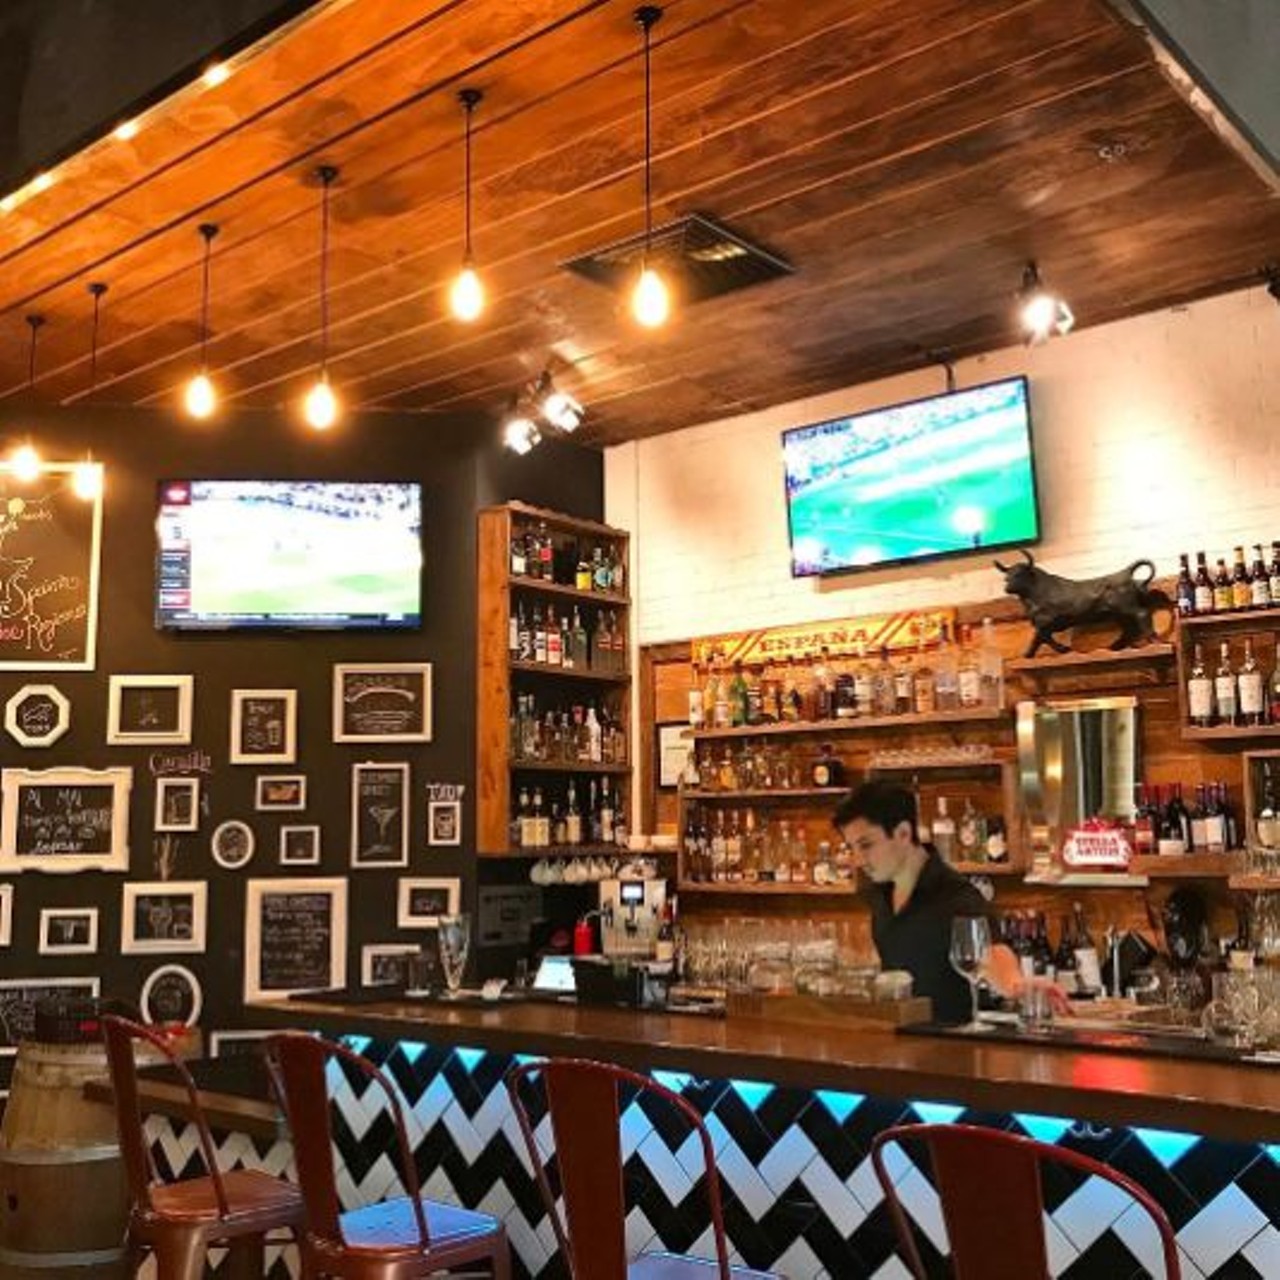 Toro Kitchen + Bar 
115 N. Loop 1604 E. #1105, (210) 592-1075 
This bright, eclectic Spanish restaurant is a must-stop locale for great food and drinks.
Photo via Instagram, loryev